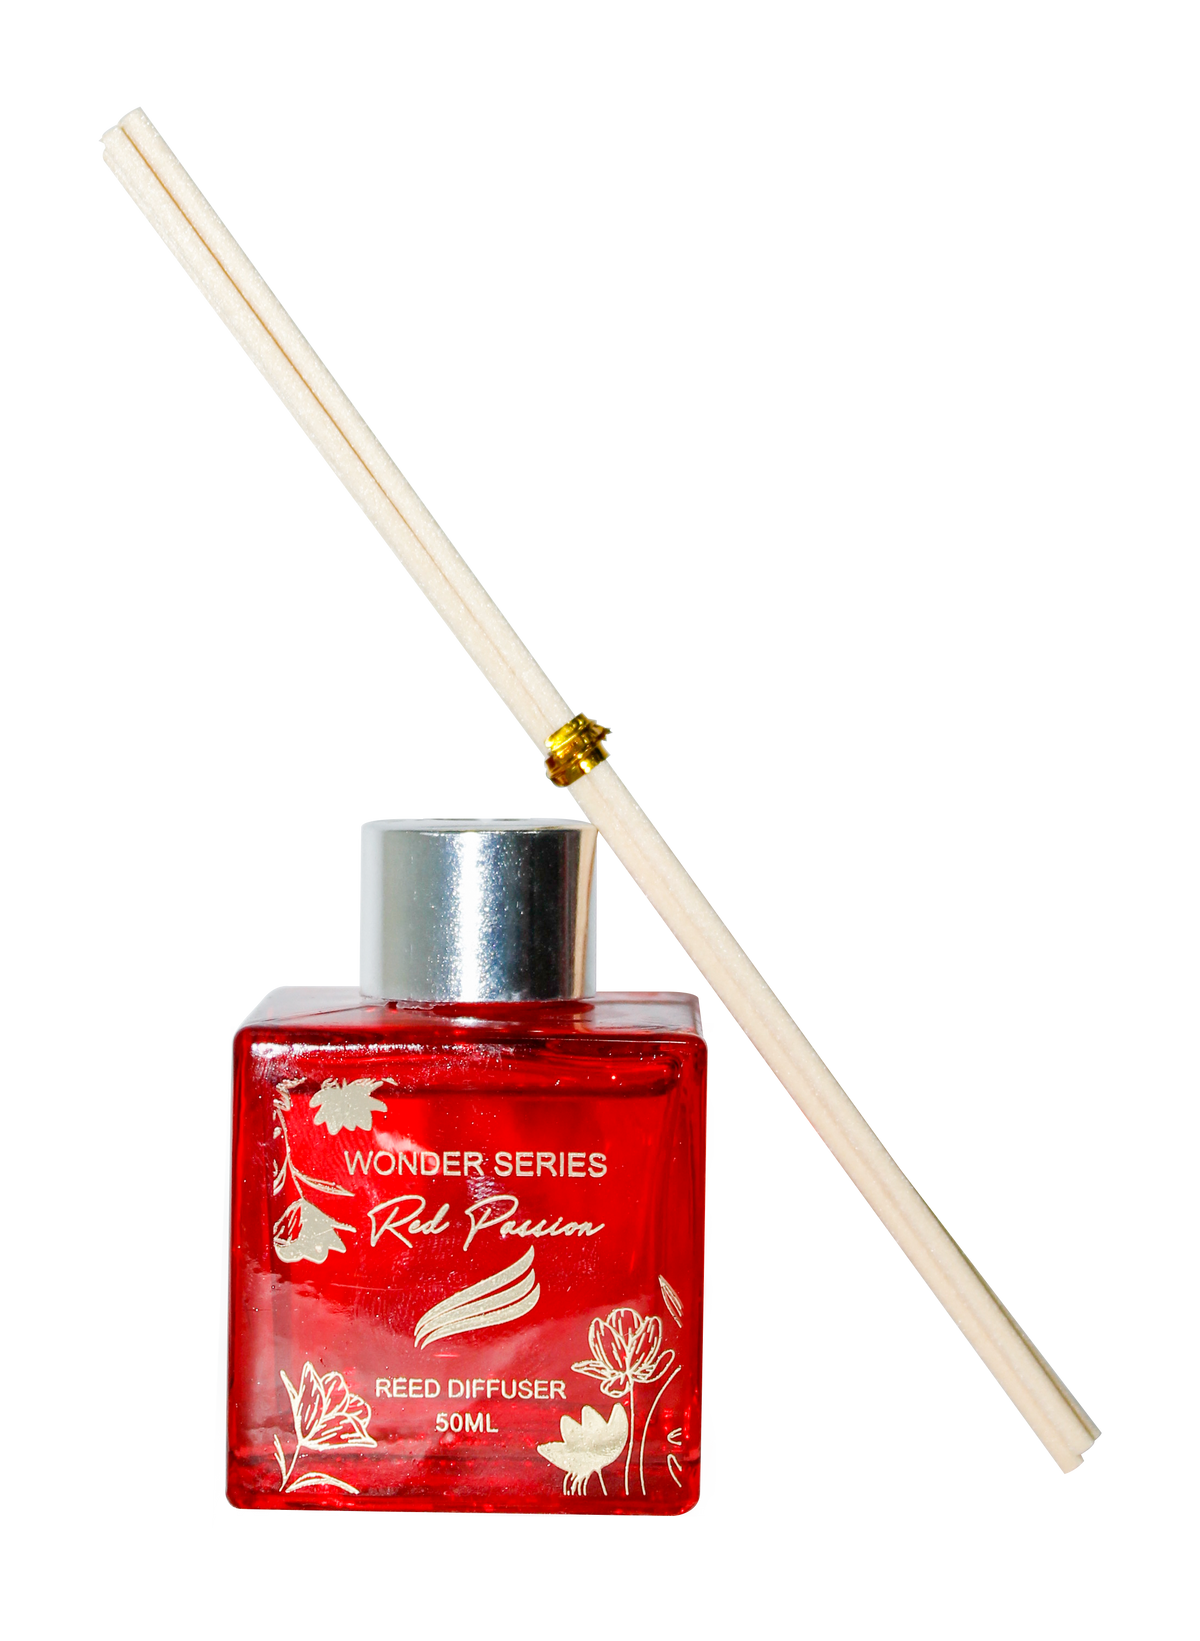 Wonder Series Reed Diffuser - 50ml - Red Passion